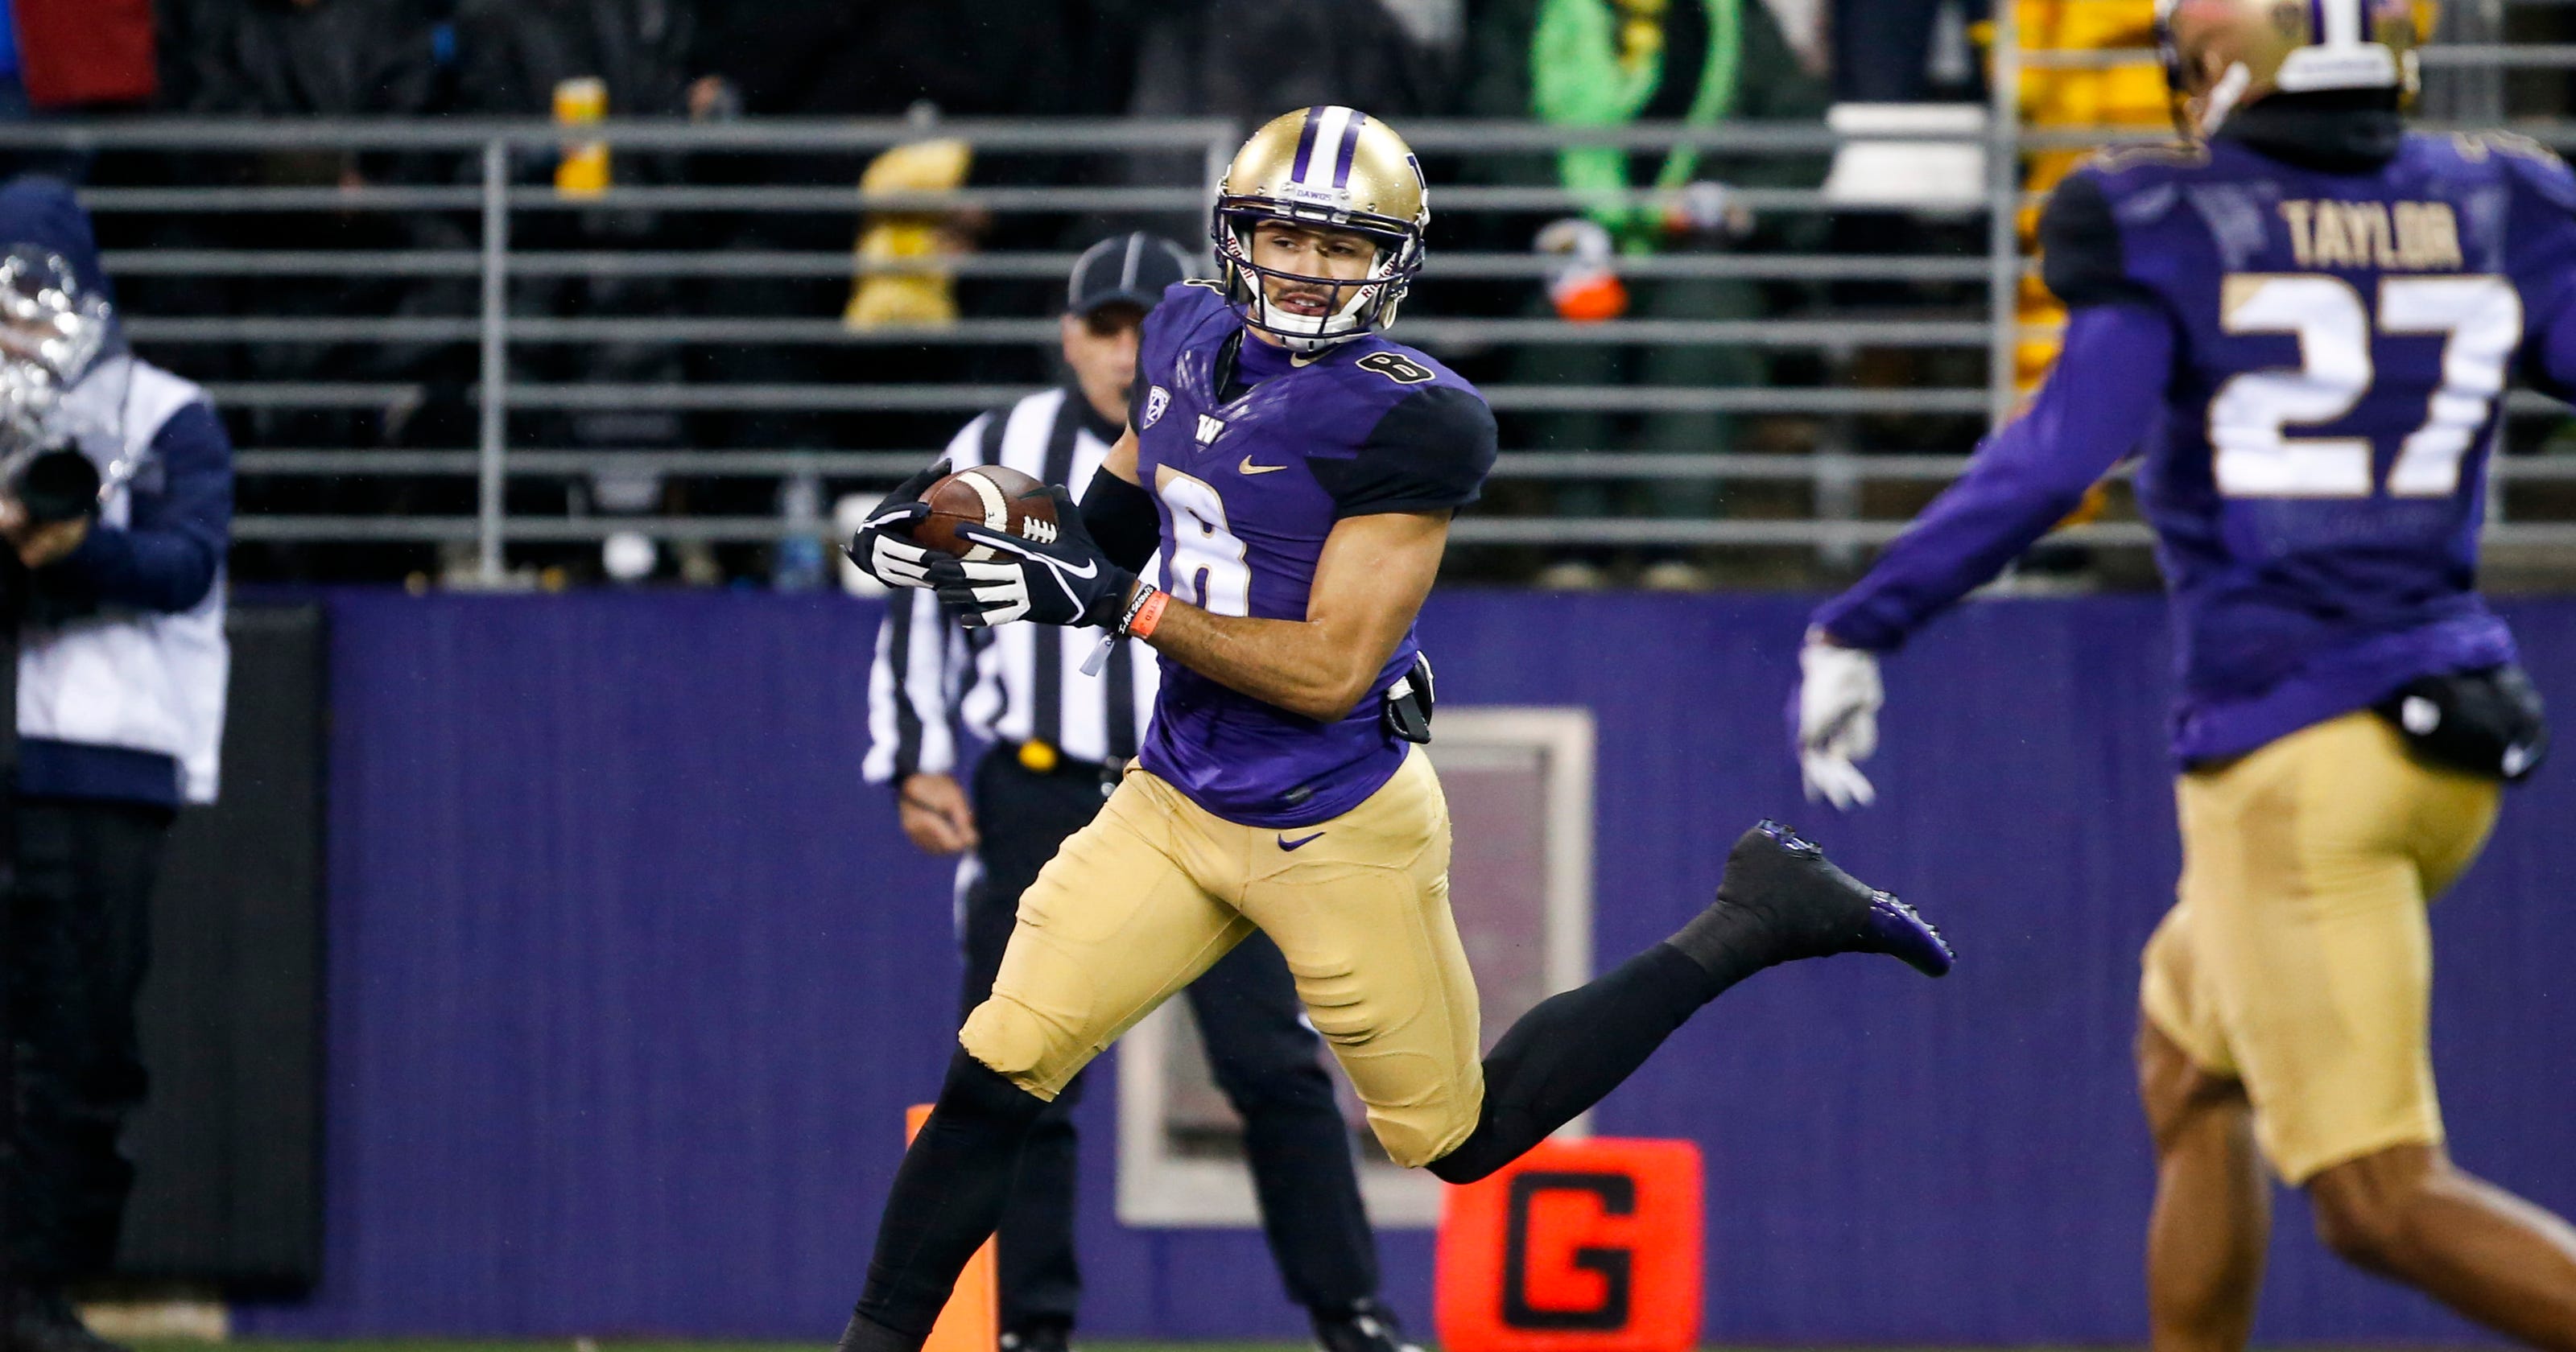 Washington's Dante Pettis sets record with ninth career punt return for TD3200 x 1680